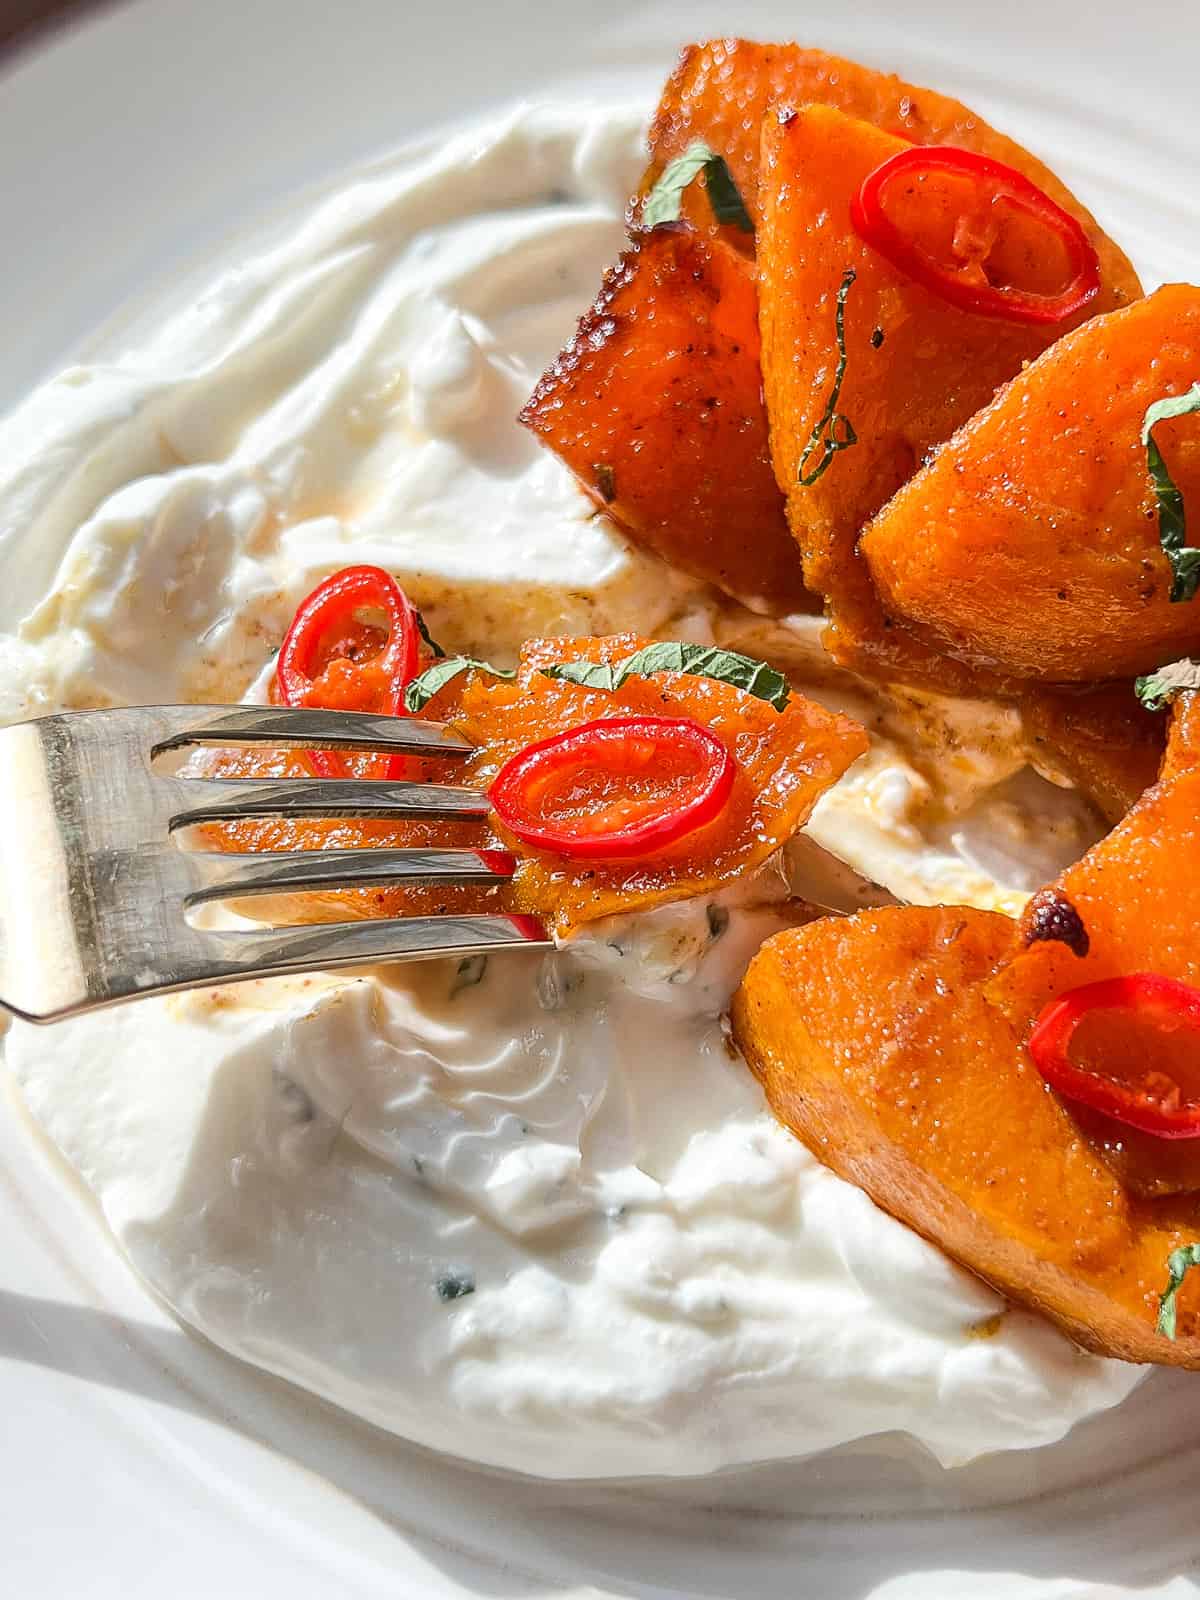 A close up image of the labneh mixture on a plate underneath the roasted squash, with a brass fork about to take a piece off the plate.